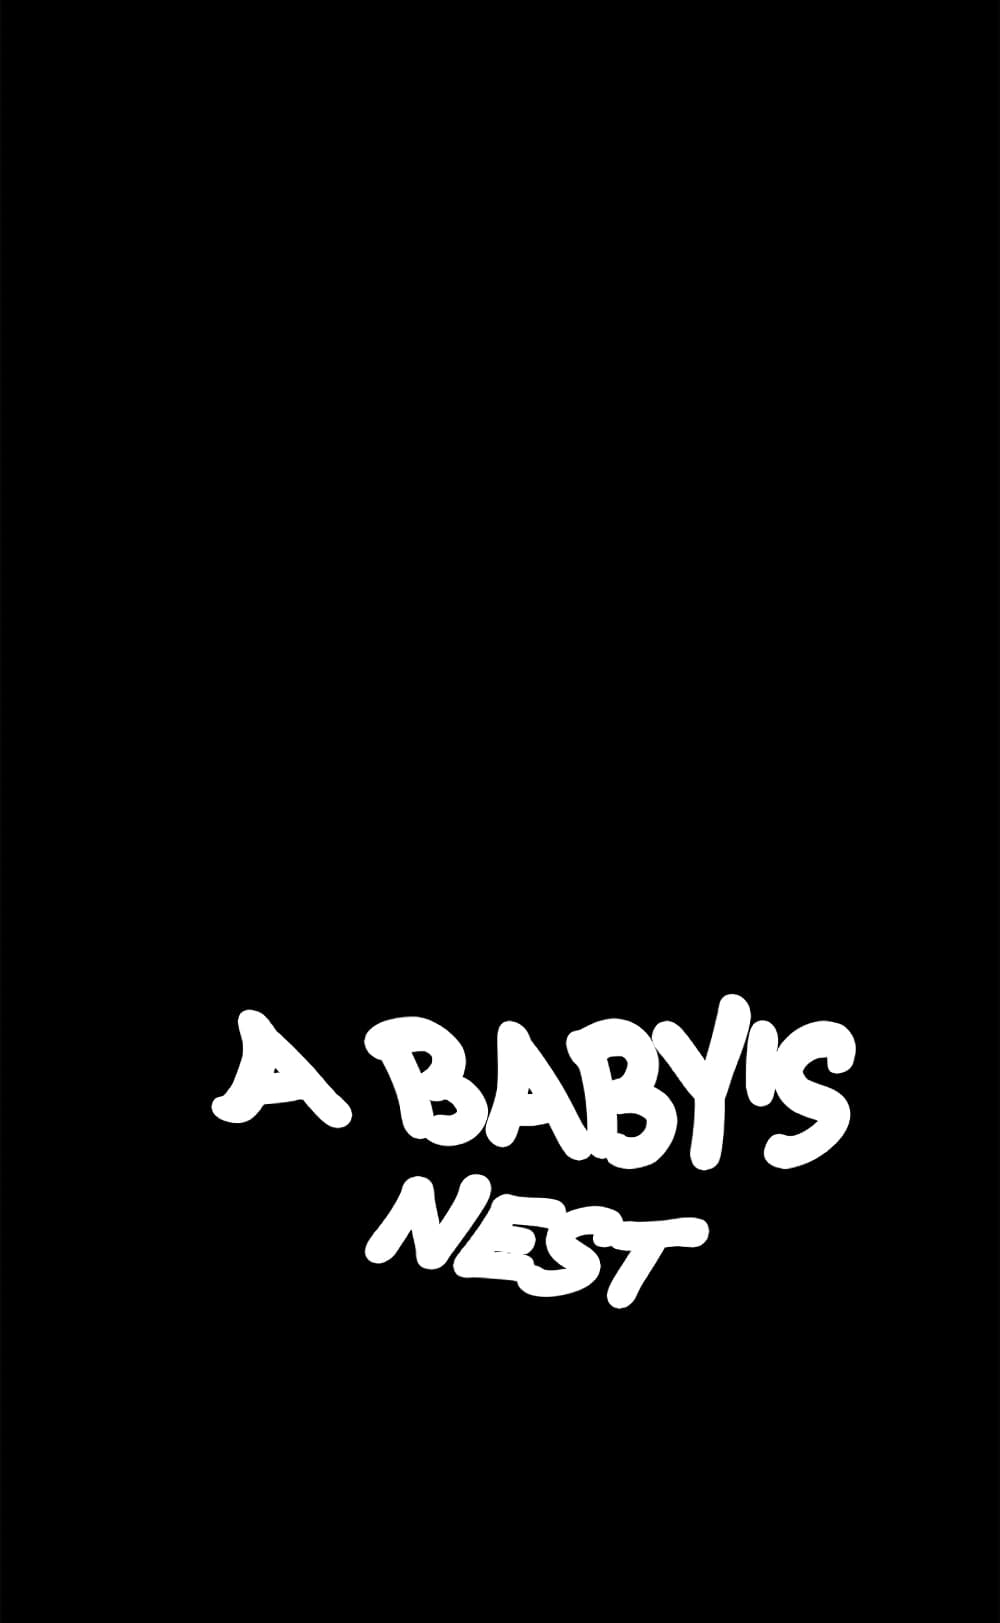 A Baby's Nest 7 (4)